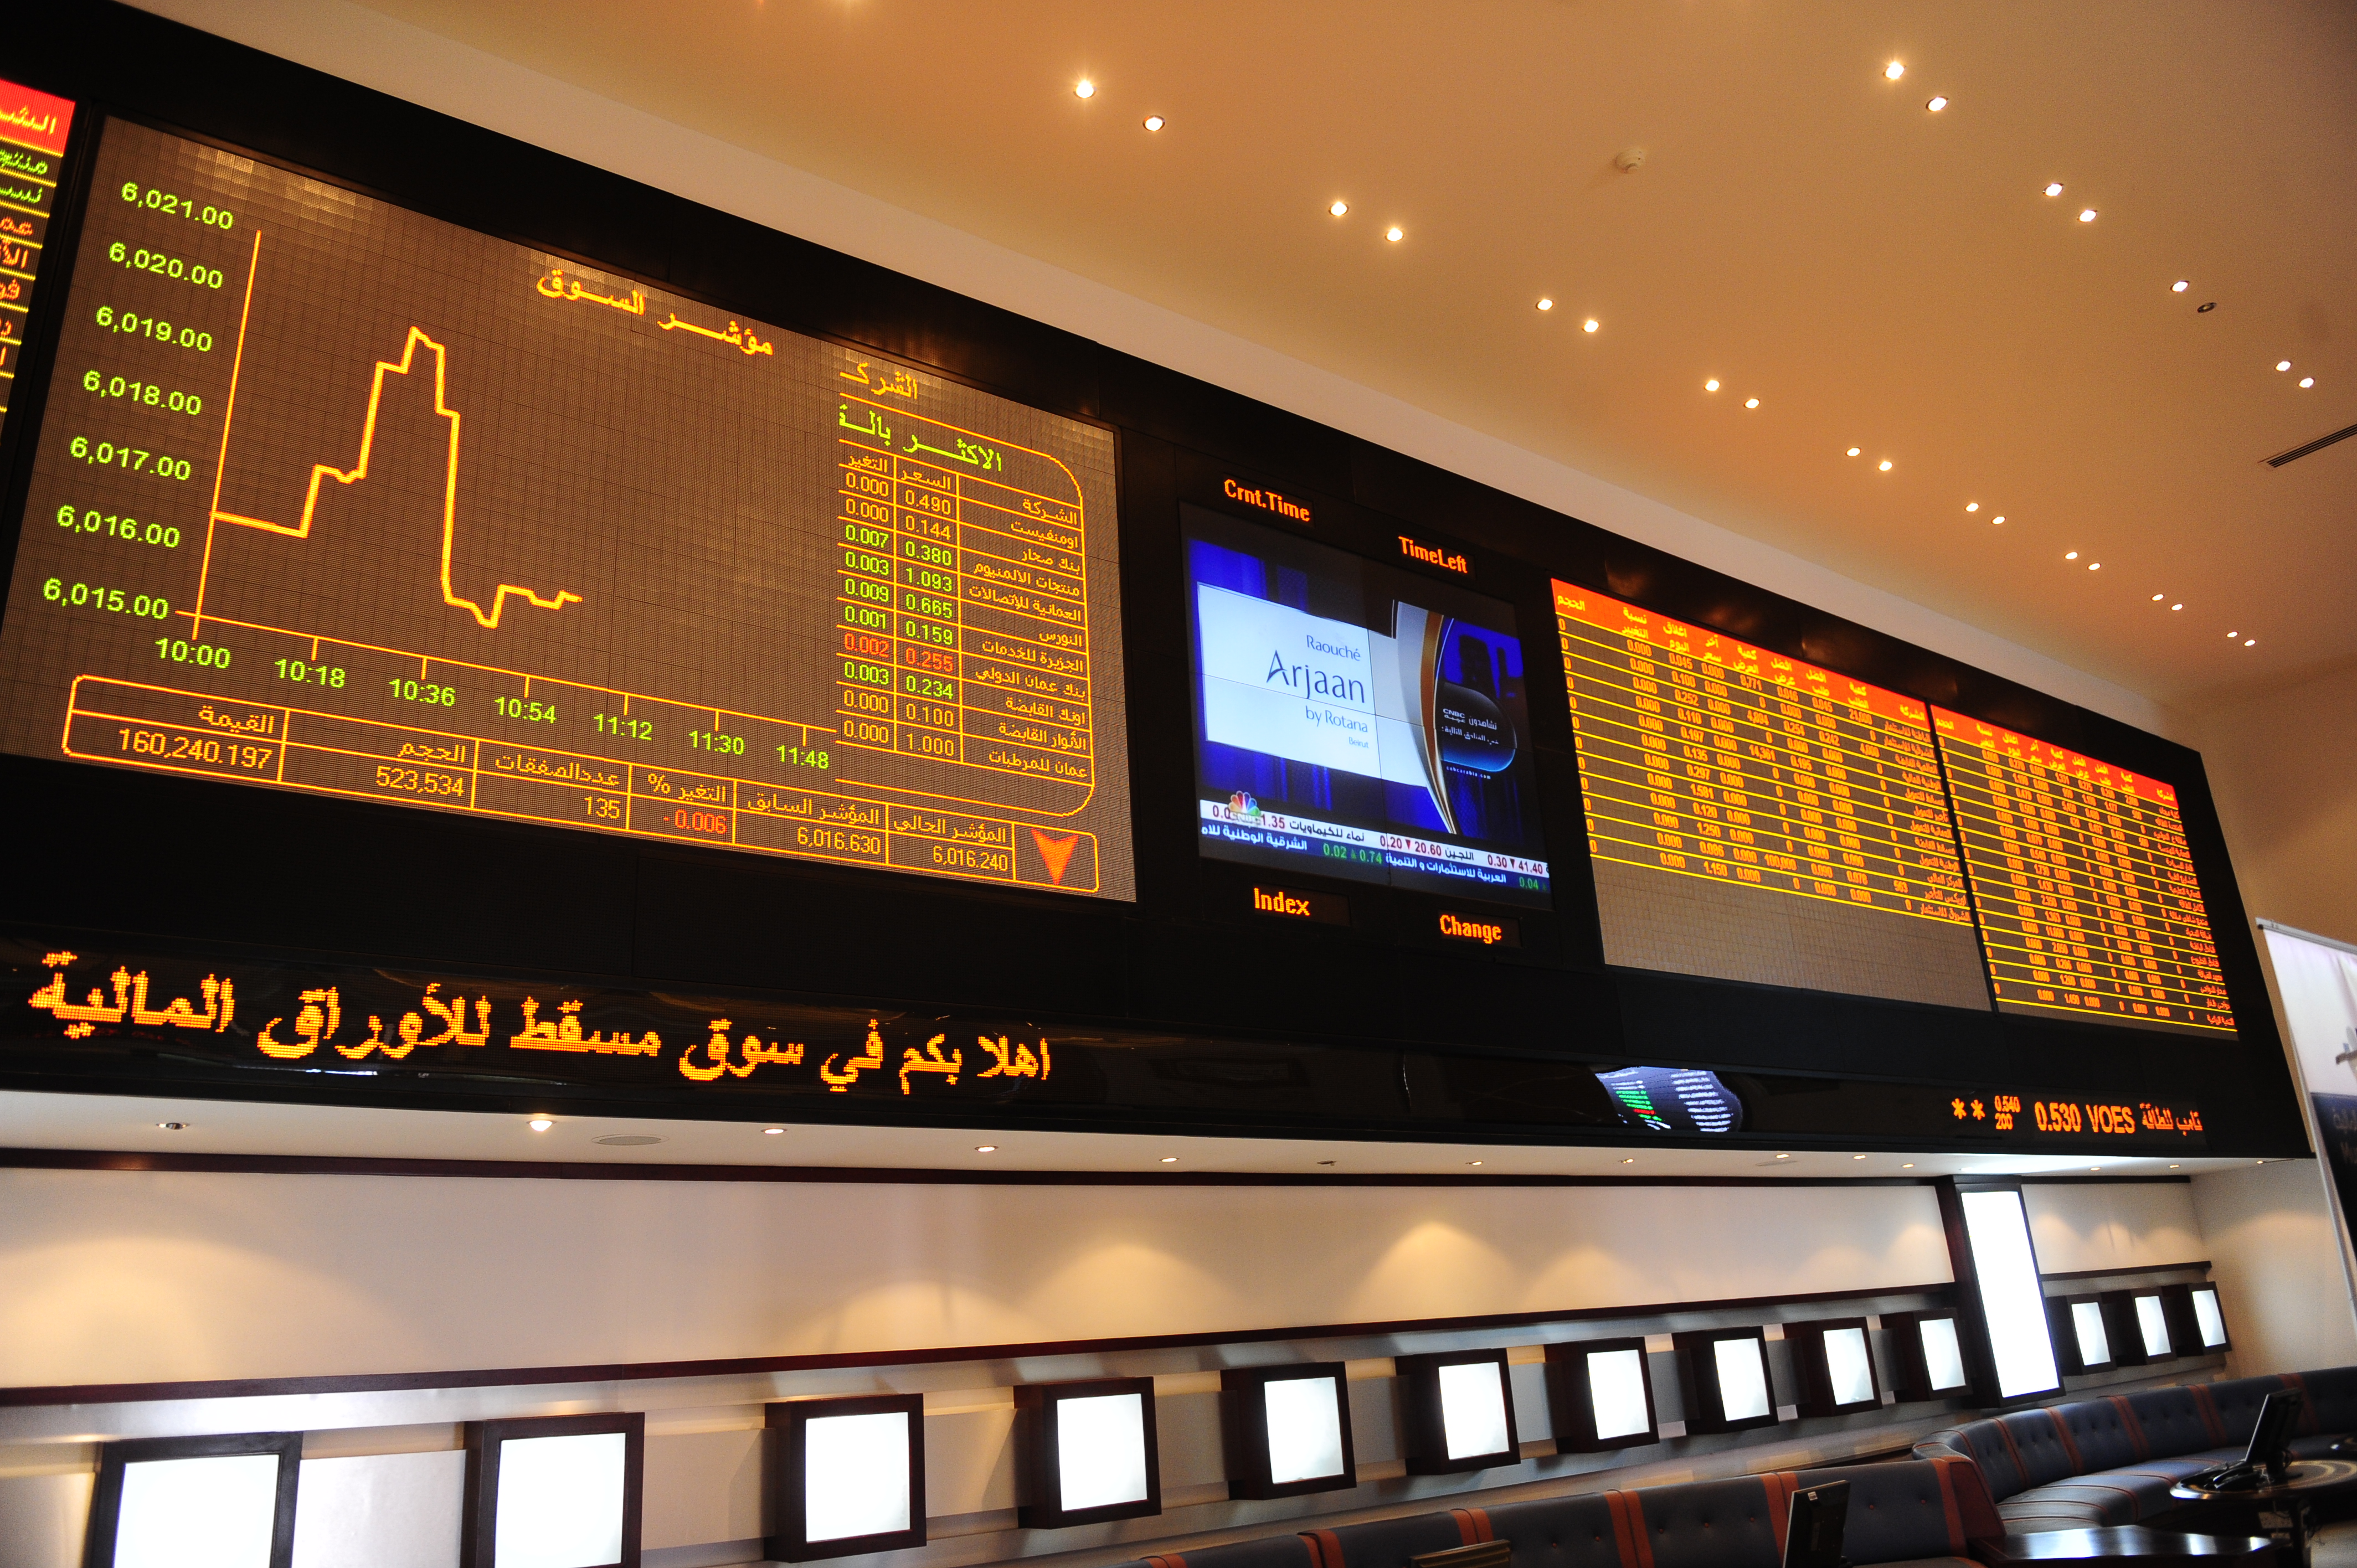 Late buying support lifts Oman share index